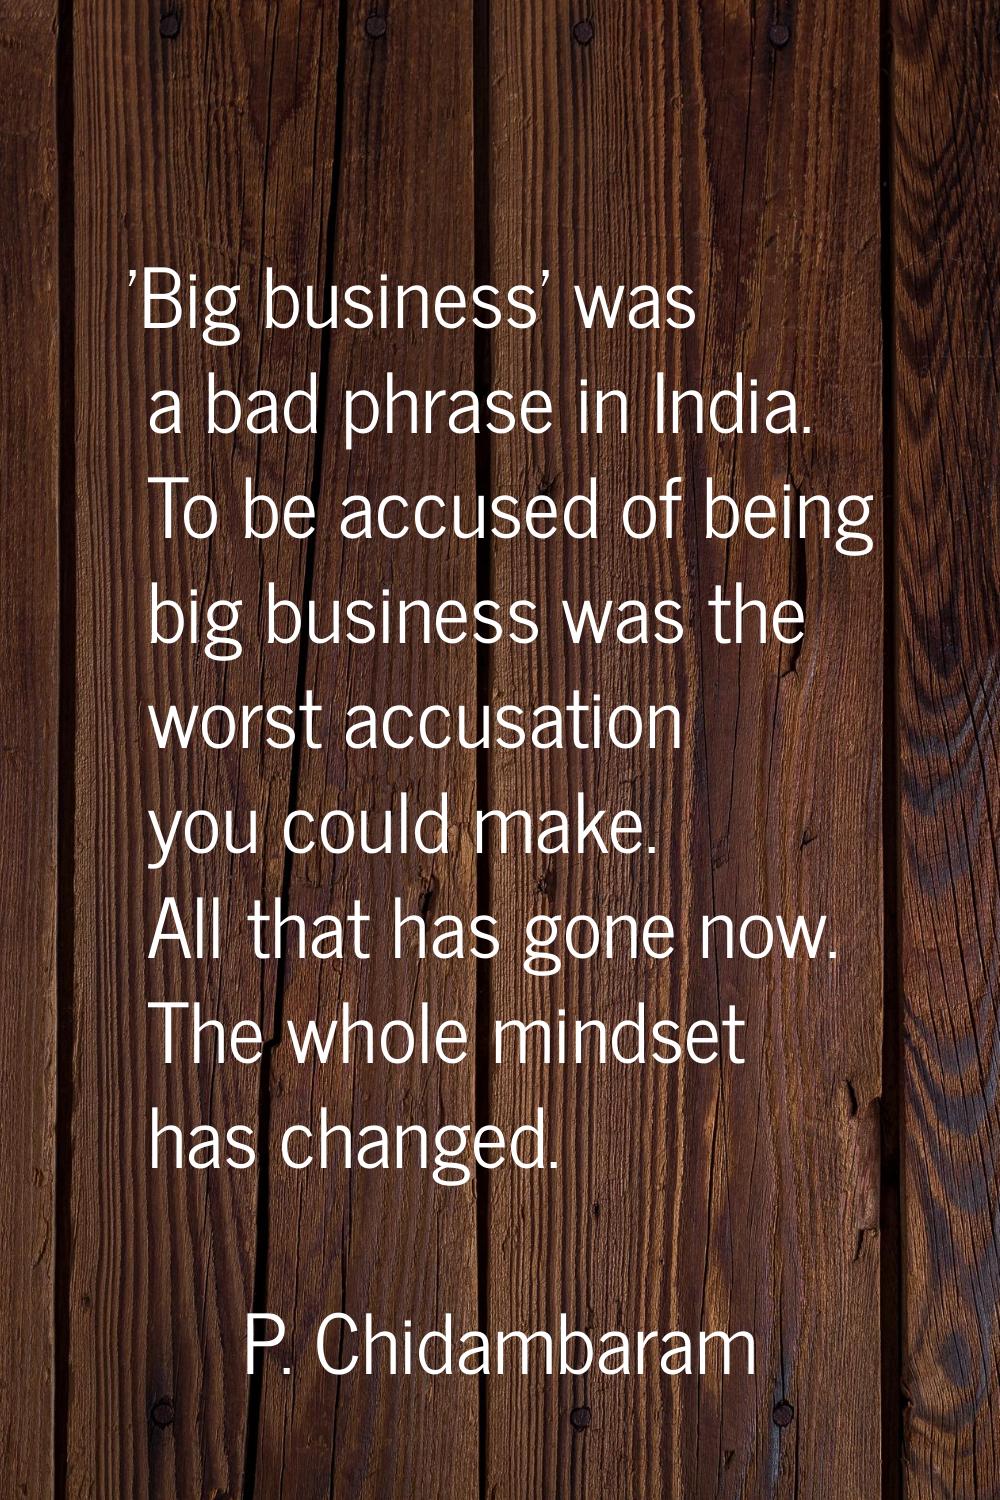 'Big business' was a bad phrase in India. To be accused of being big business was the worst accusat